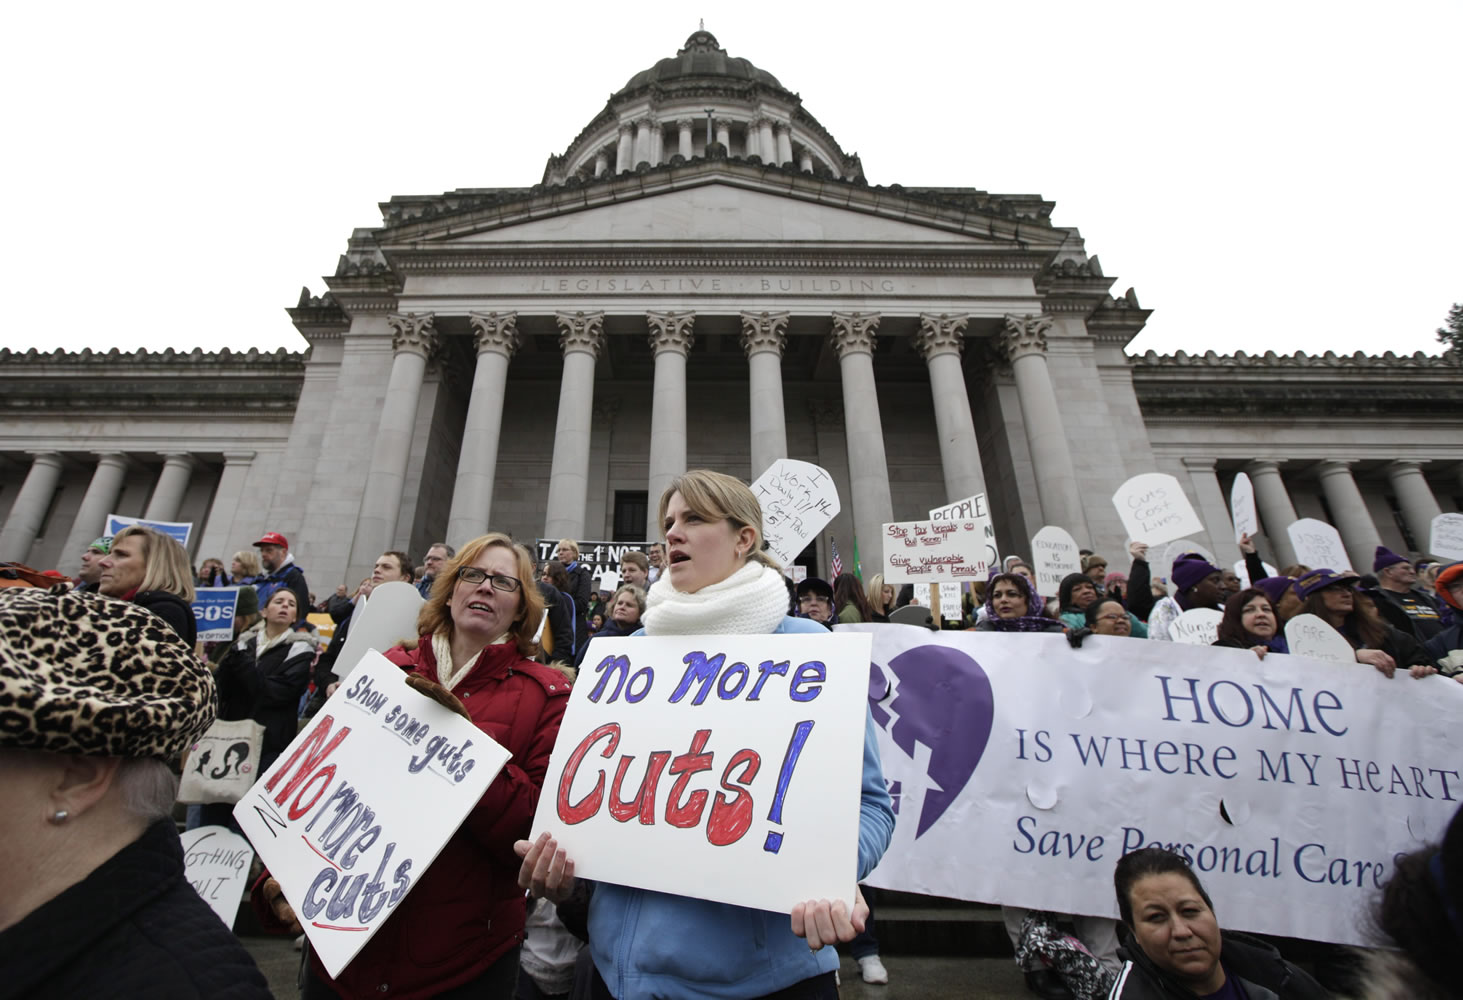 Protesters, including Regan Bailey, center left, and Heather McKimmie, center right, both of Seattle, demonstrate against budget cuts outside the Capitol in Olympia on Monday, the first day of a special session of the Washington State Legislature.